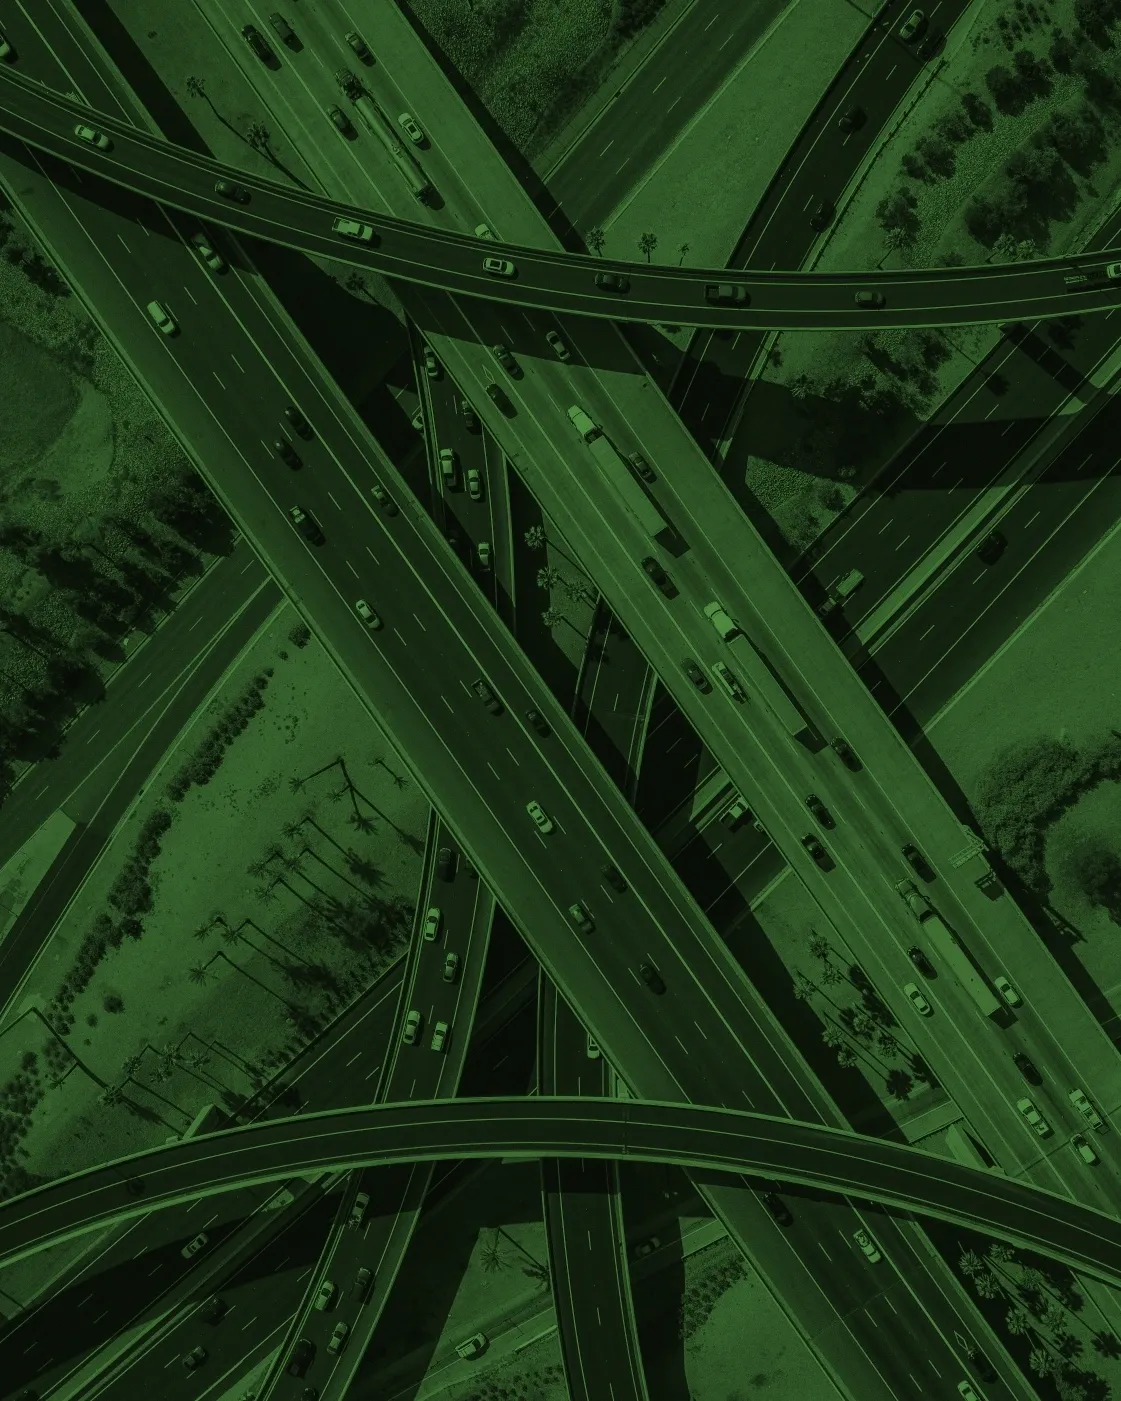 A green picture of an intersection with cars driving on it.